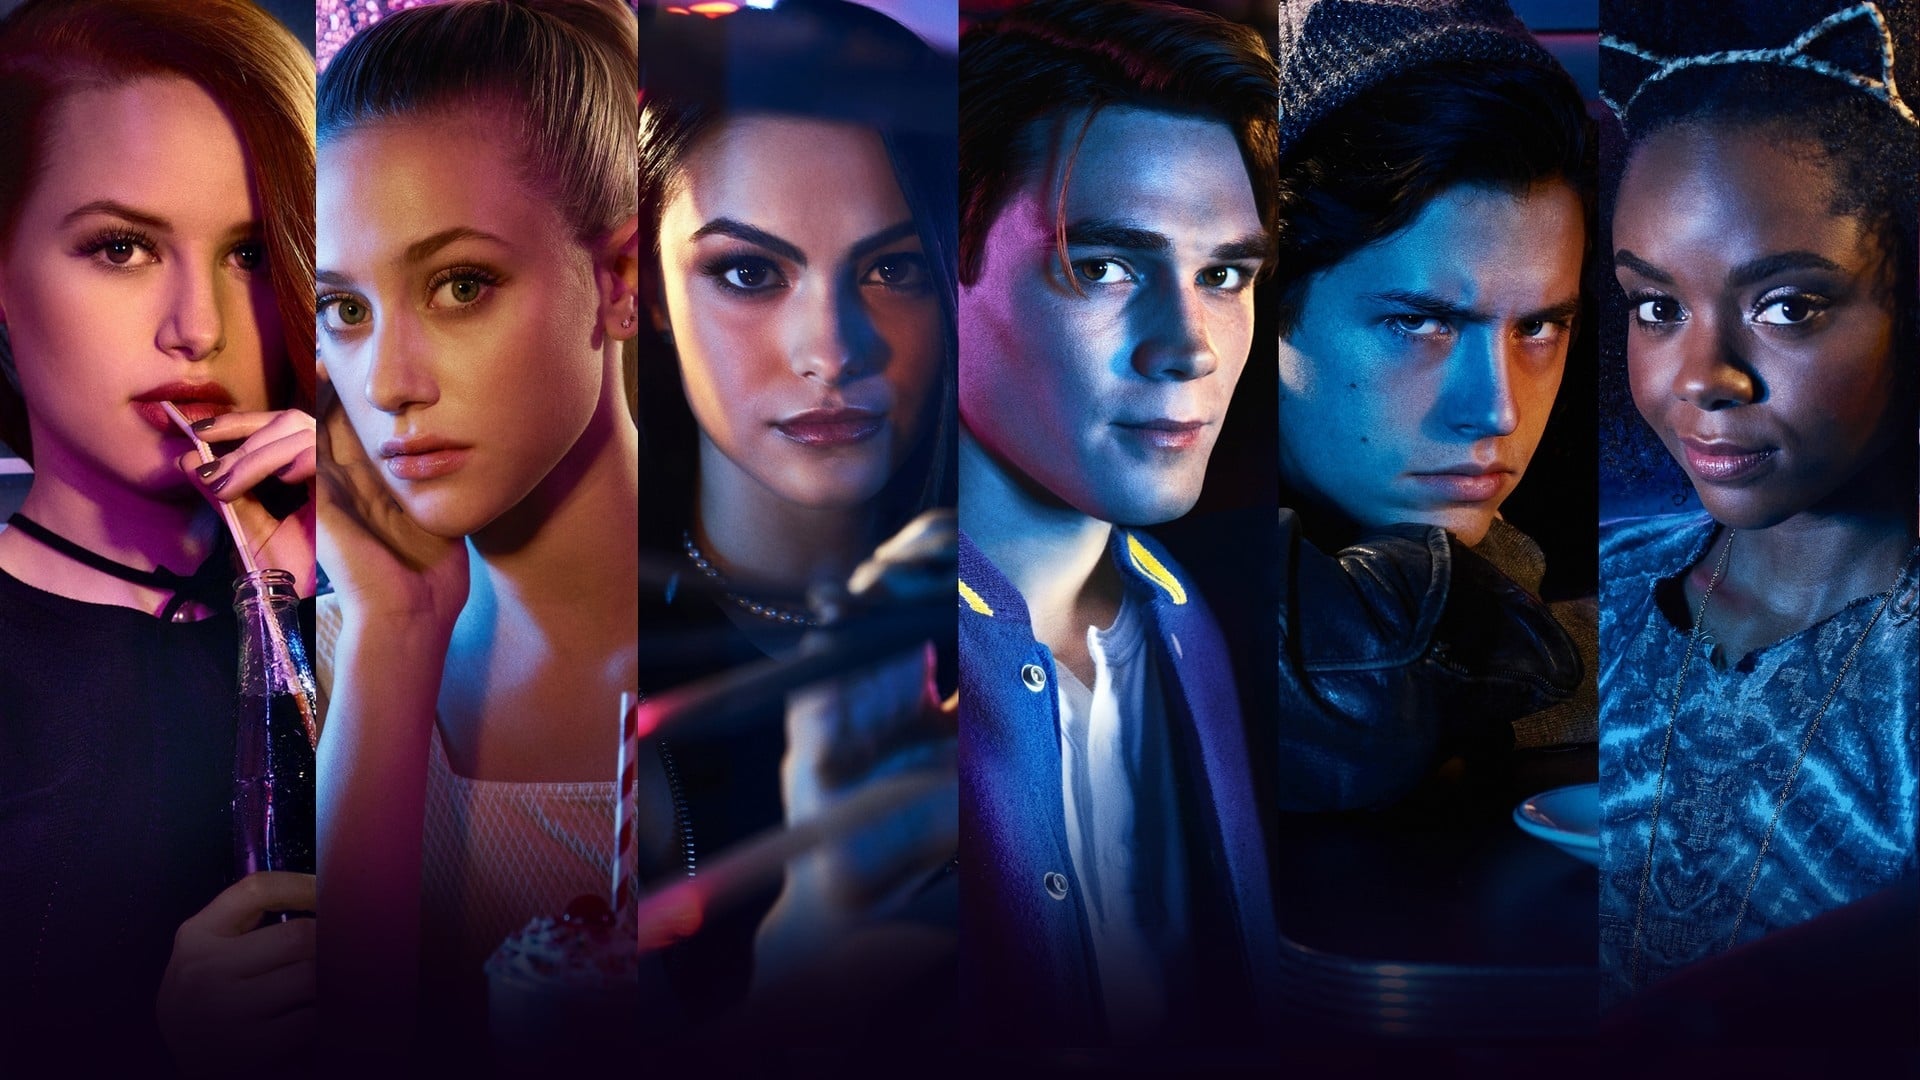 Riverdale Season 6 Episode 2 - Here's Everything We Know So Far.